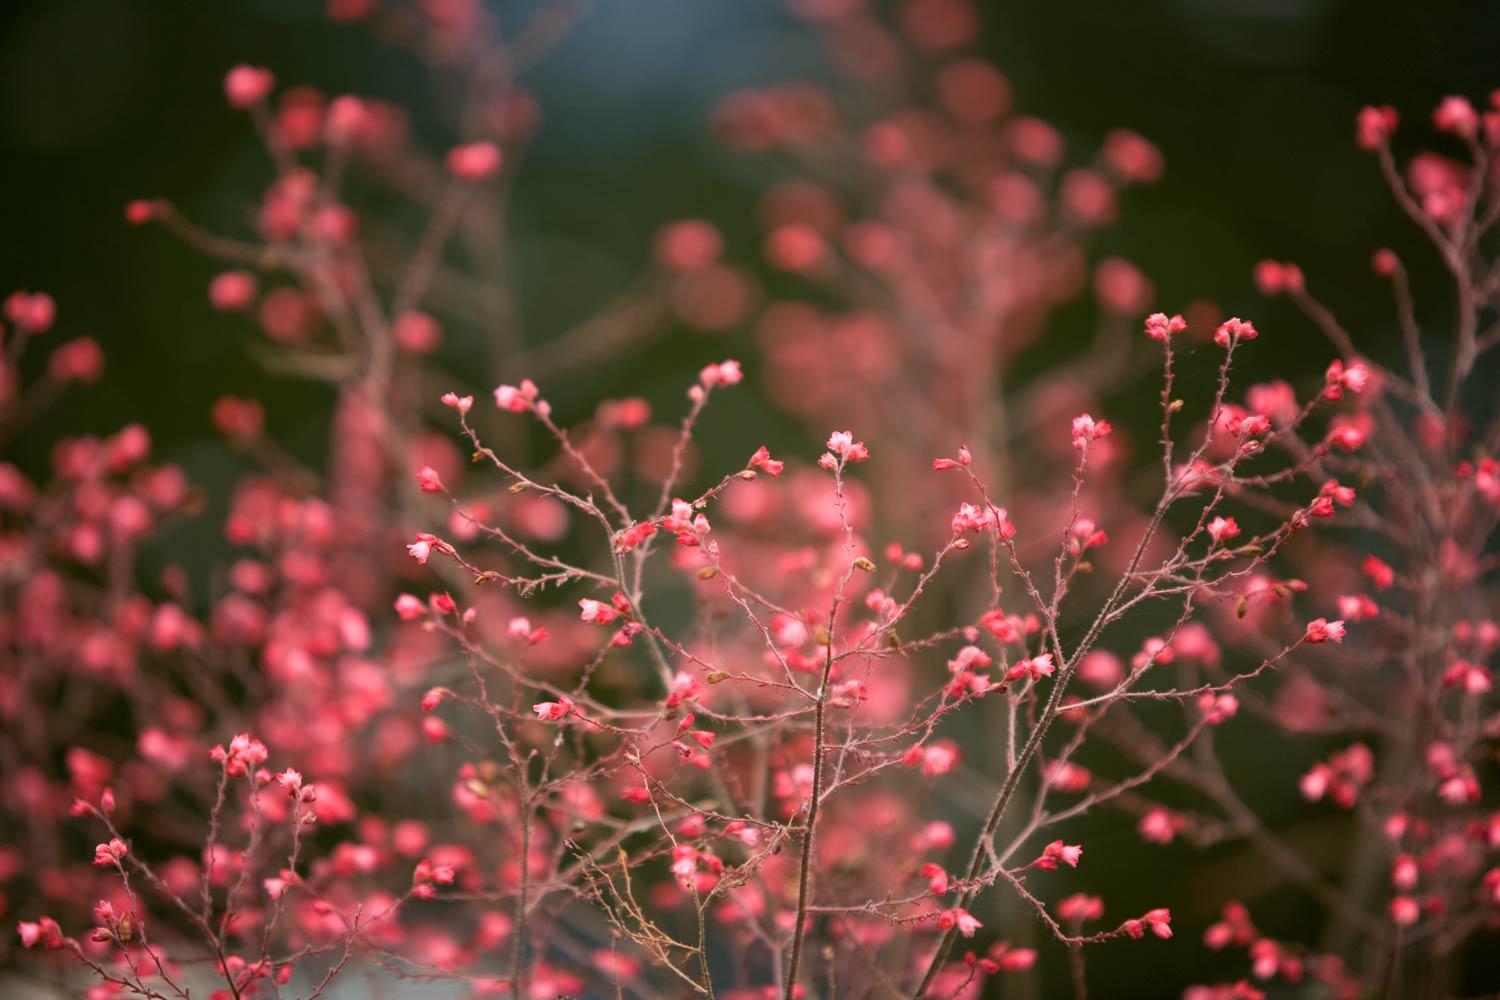 Ethereal red flowers